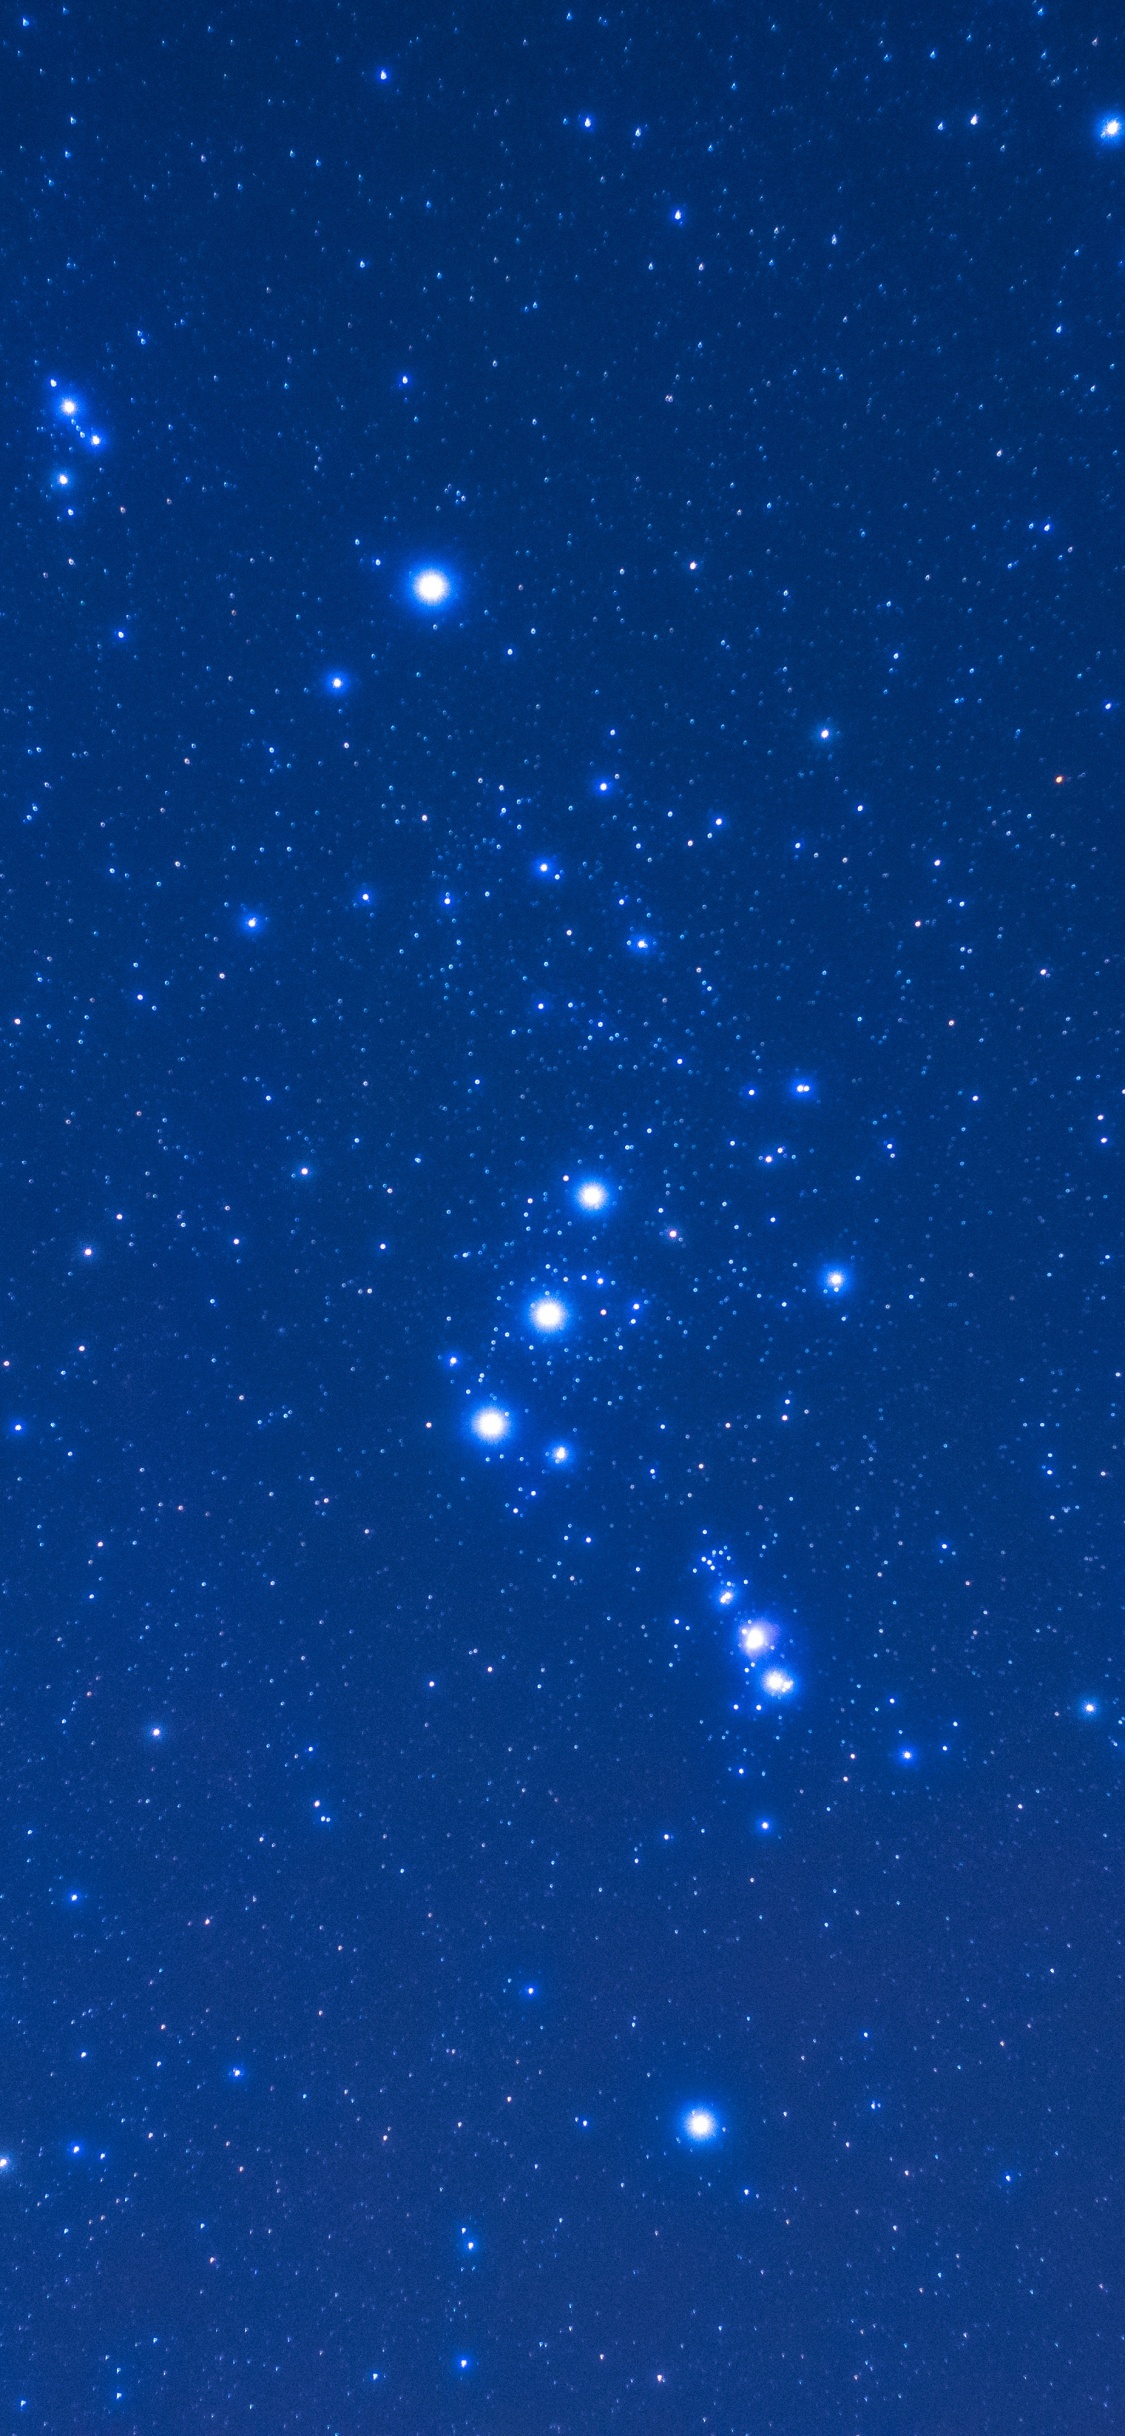 Blue and White Stars in Blue Sky. Wallpaper in 1125x2436 Resolution